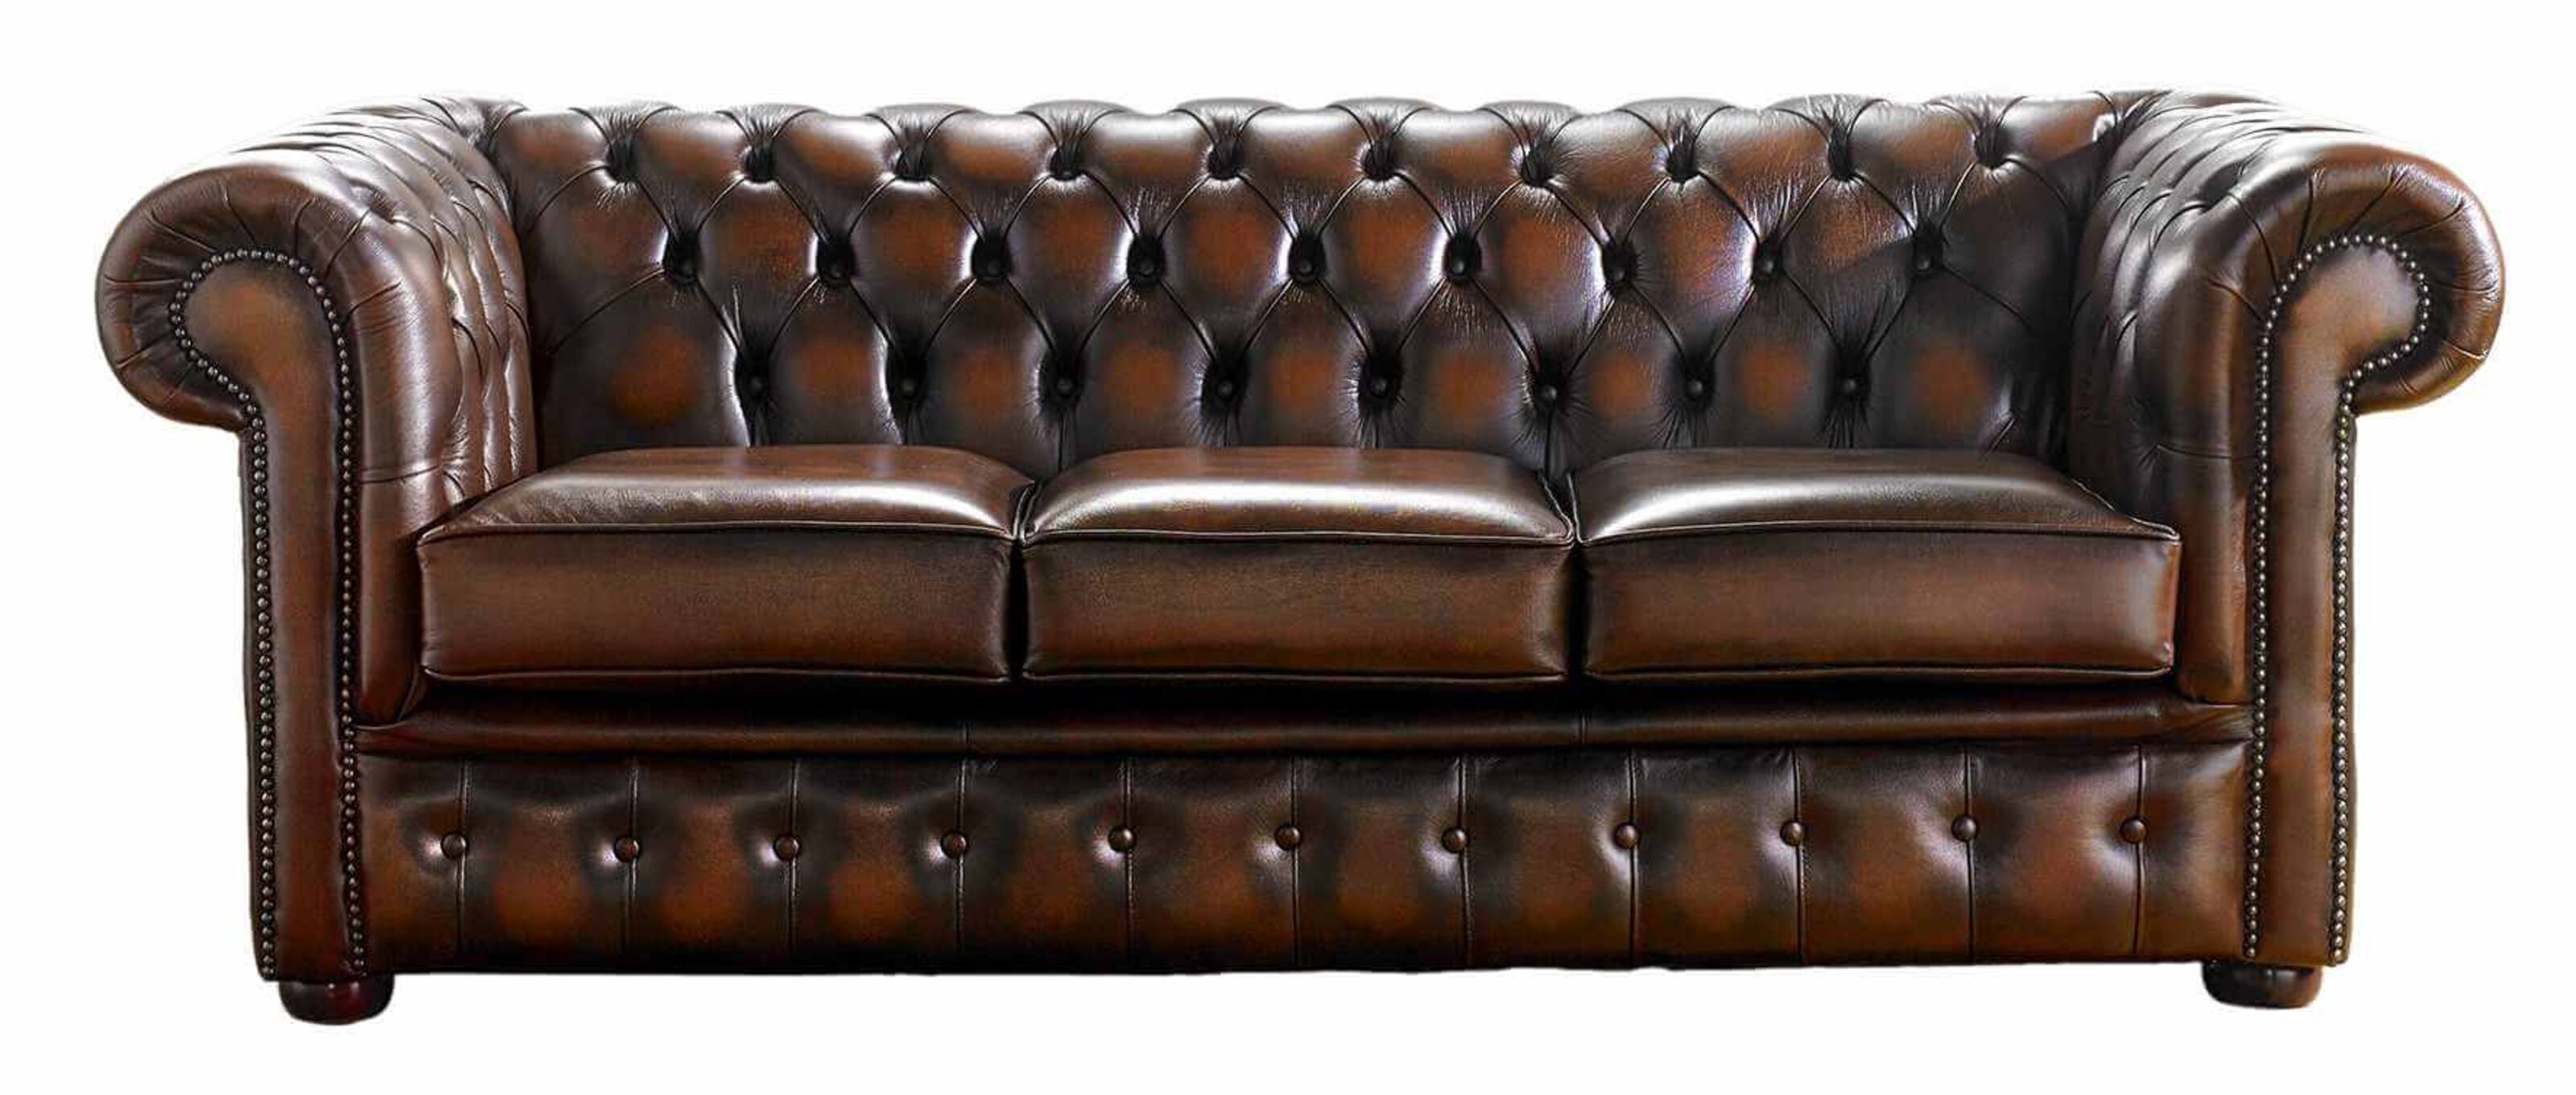 Finding Luxury Chesterfield Sofas Available on eBay  %Post Title